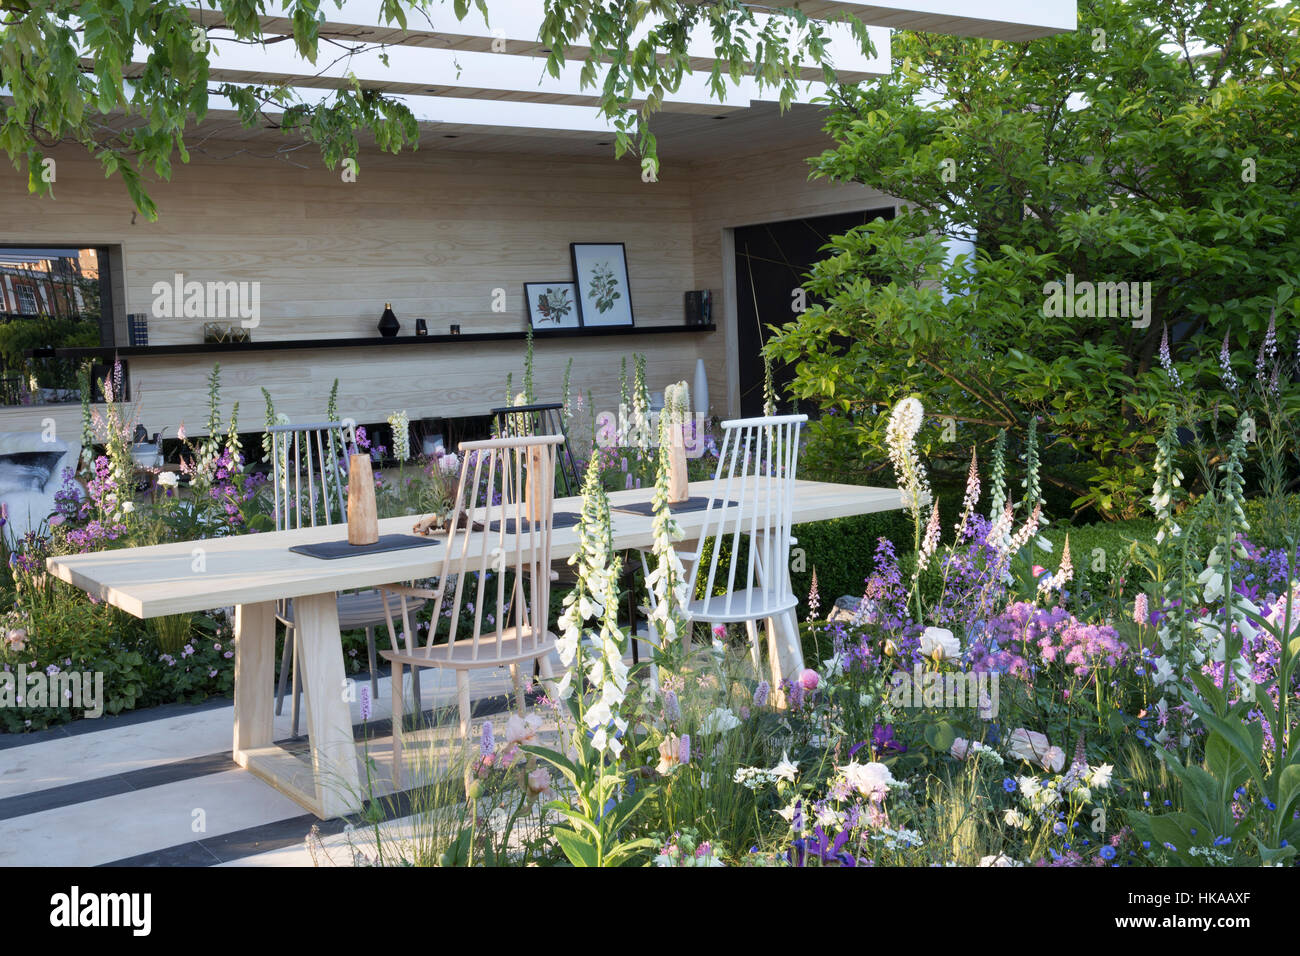 Outdoor garden dining area patio garden furniture of table and chairs, flower border RHS Chelsea Flower Show UK Stock Photo